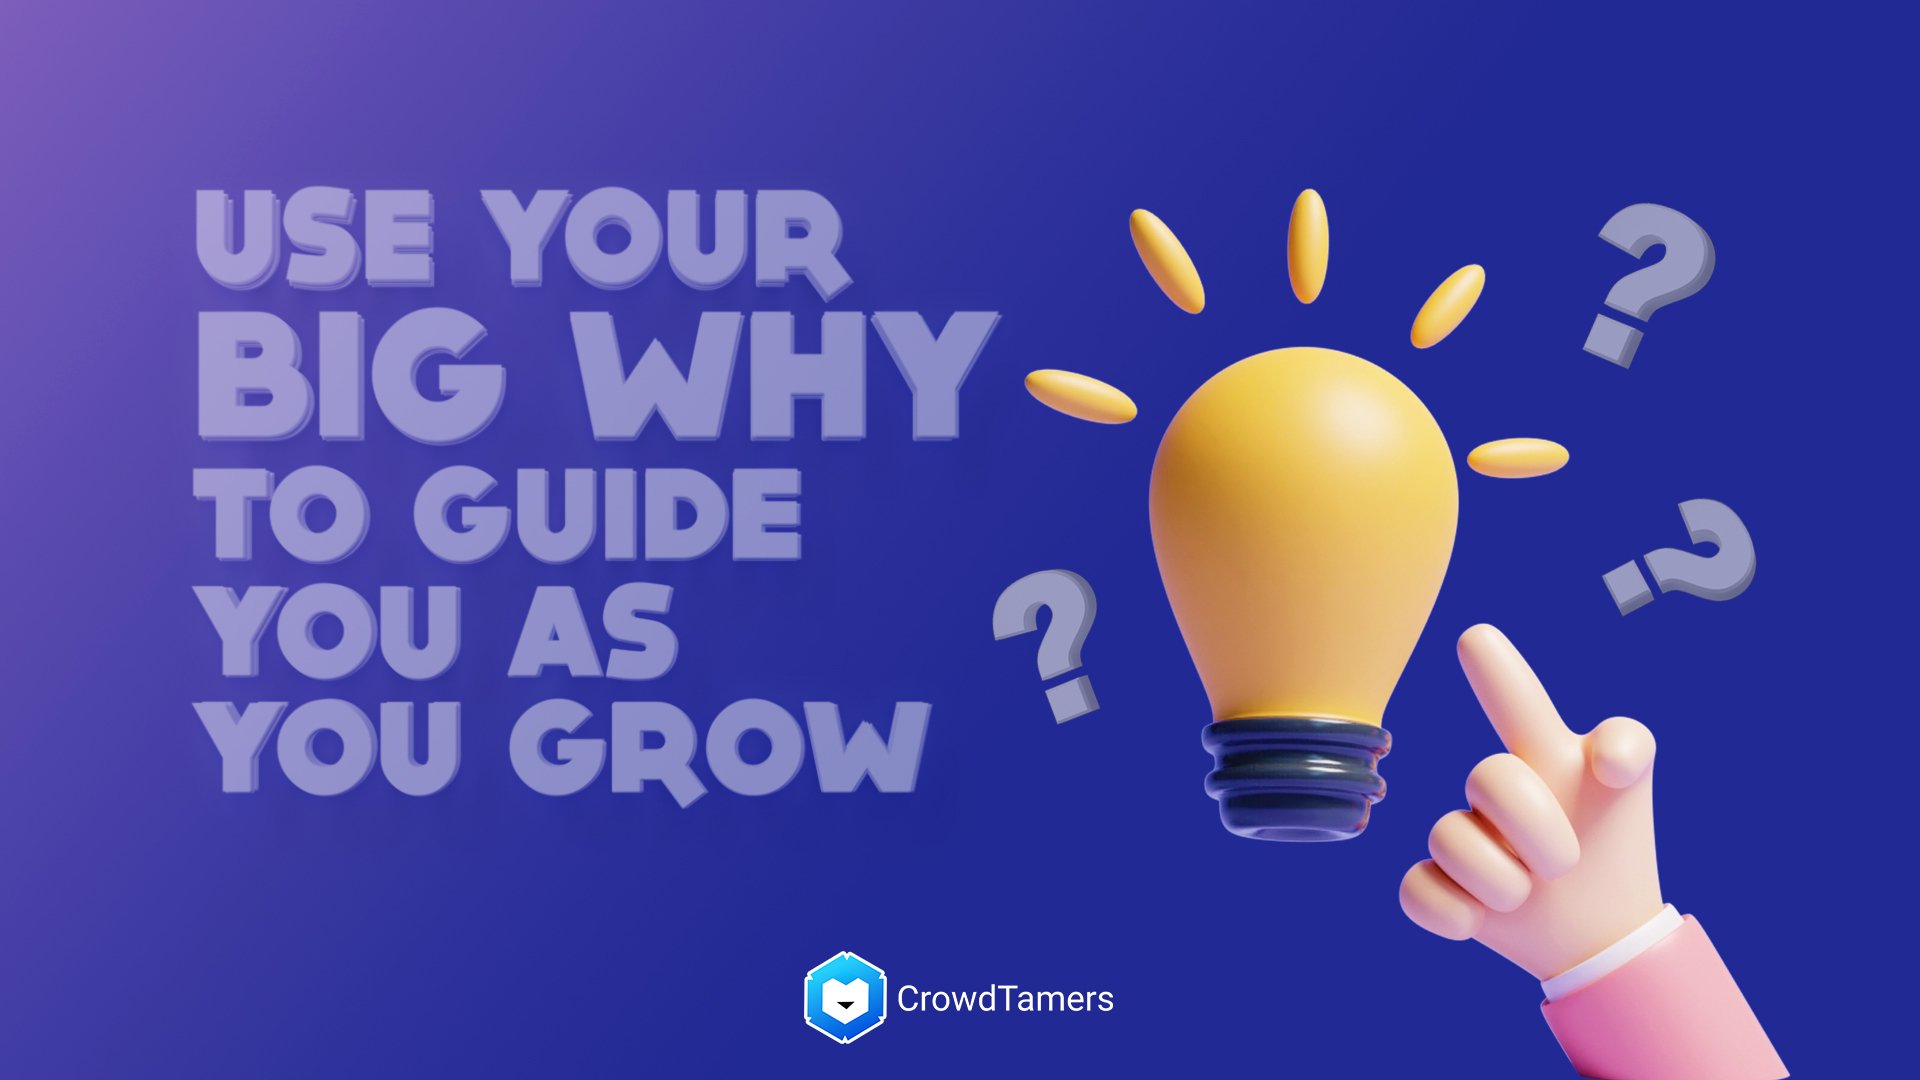 Your big Why helps you grow